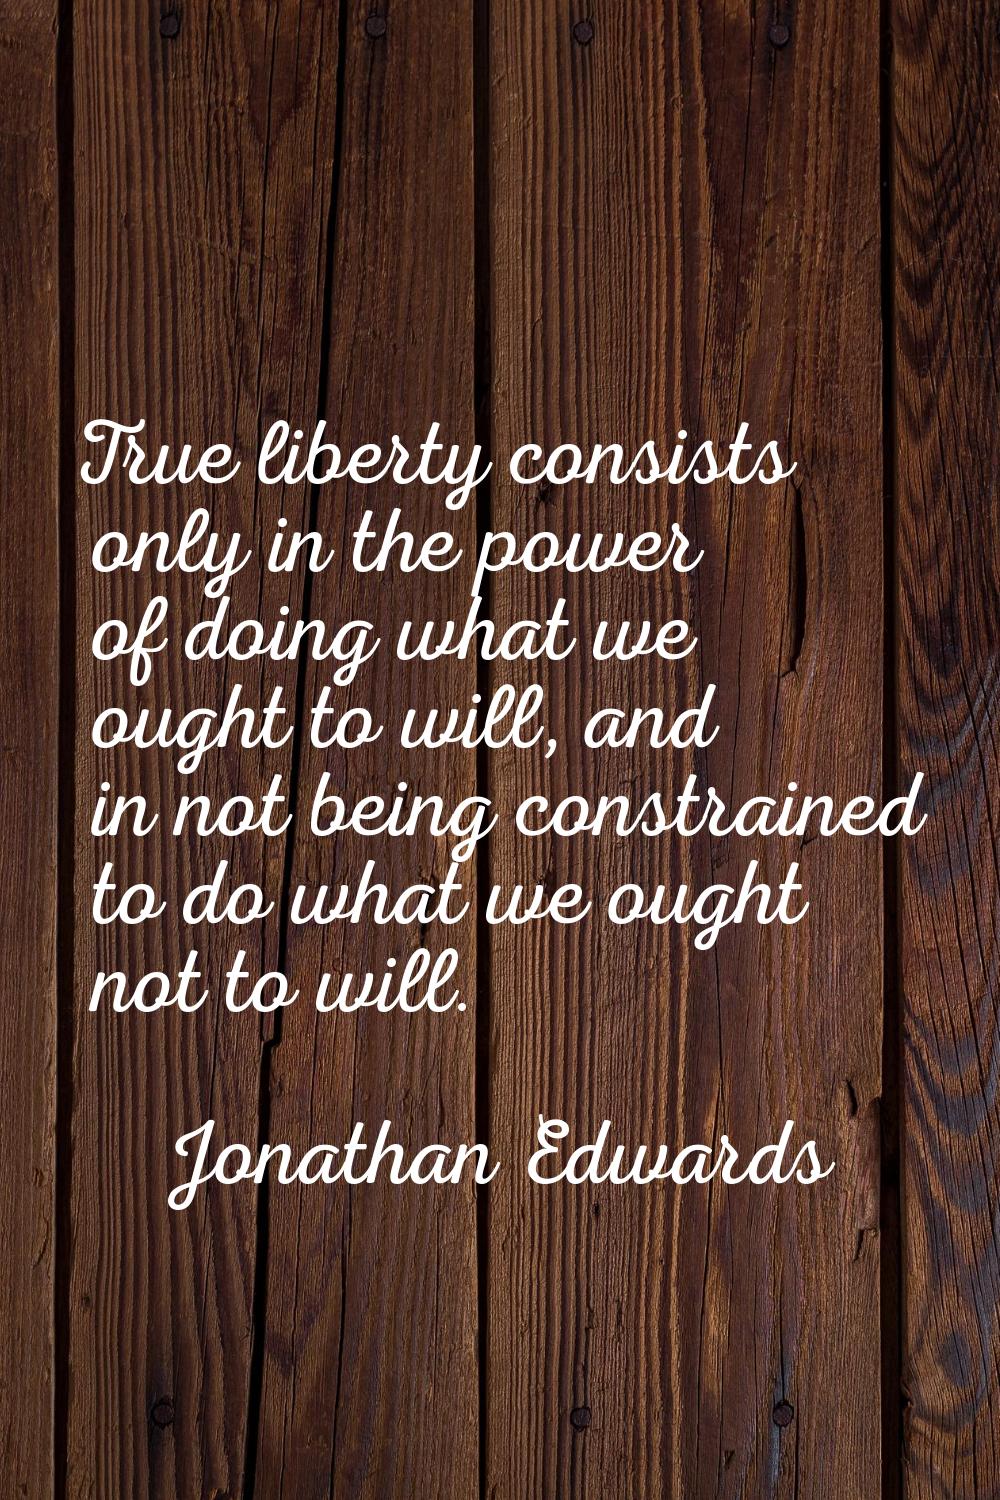 True liberty consists only in the power of doing what we ought to will, and in not being constraine